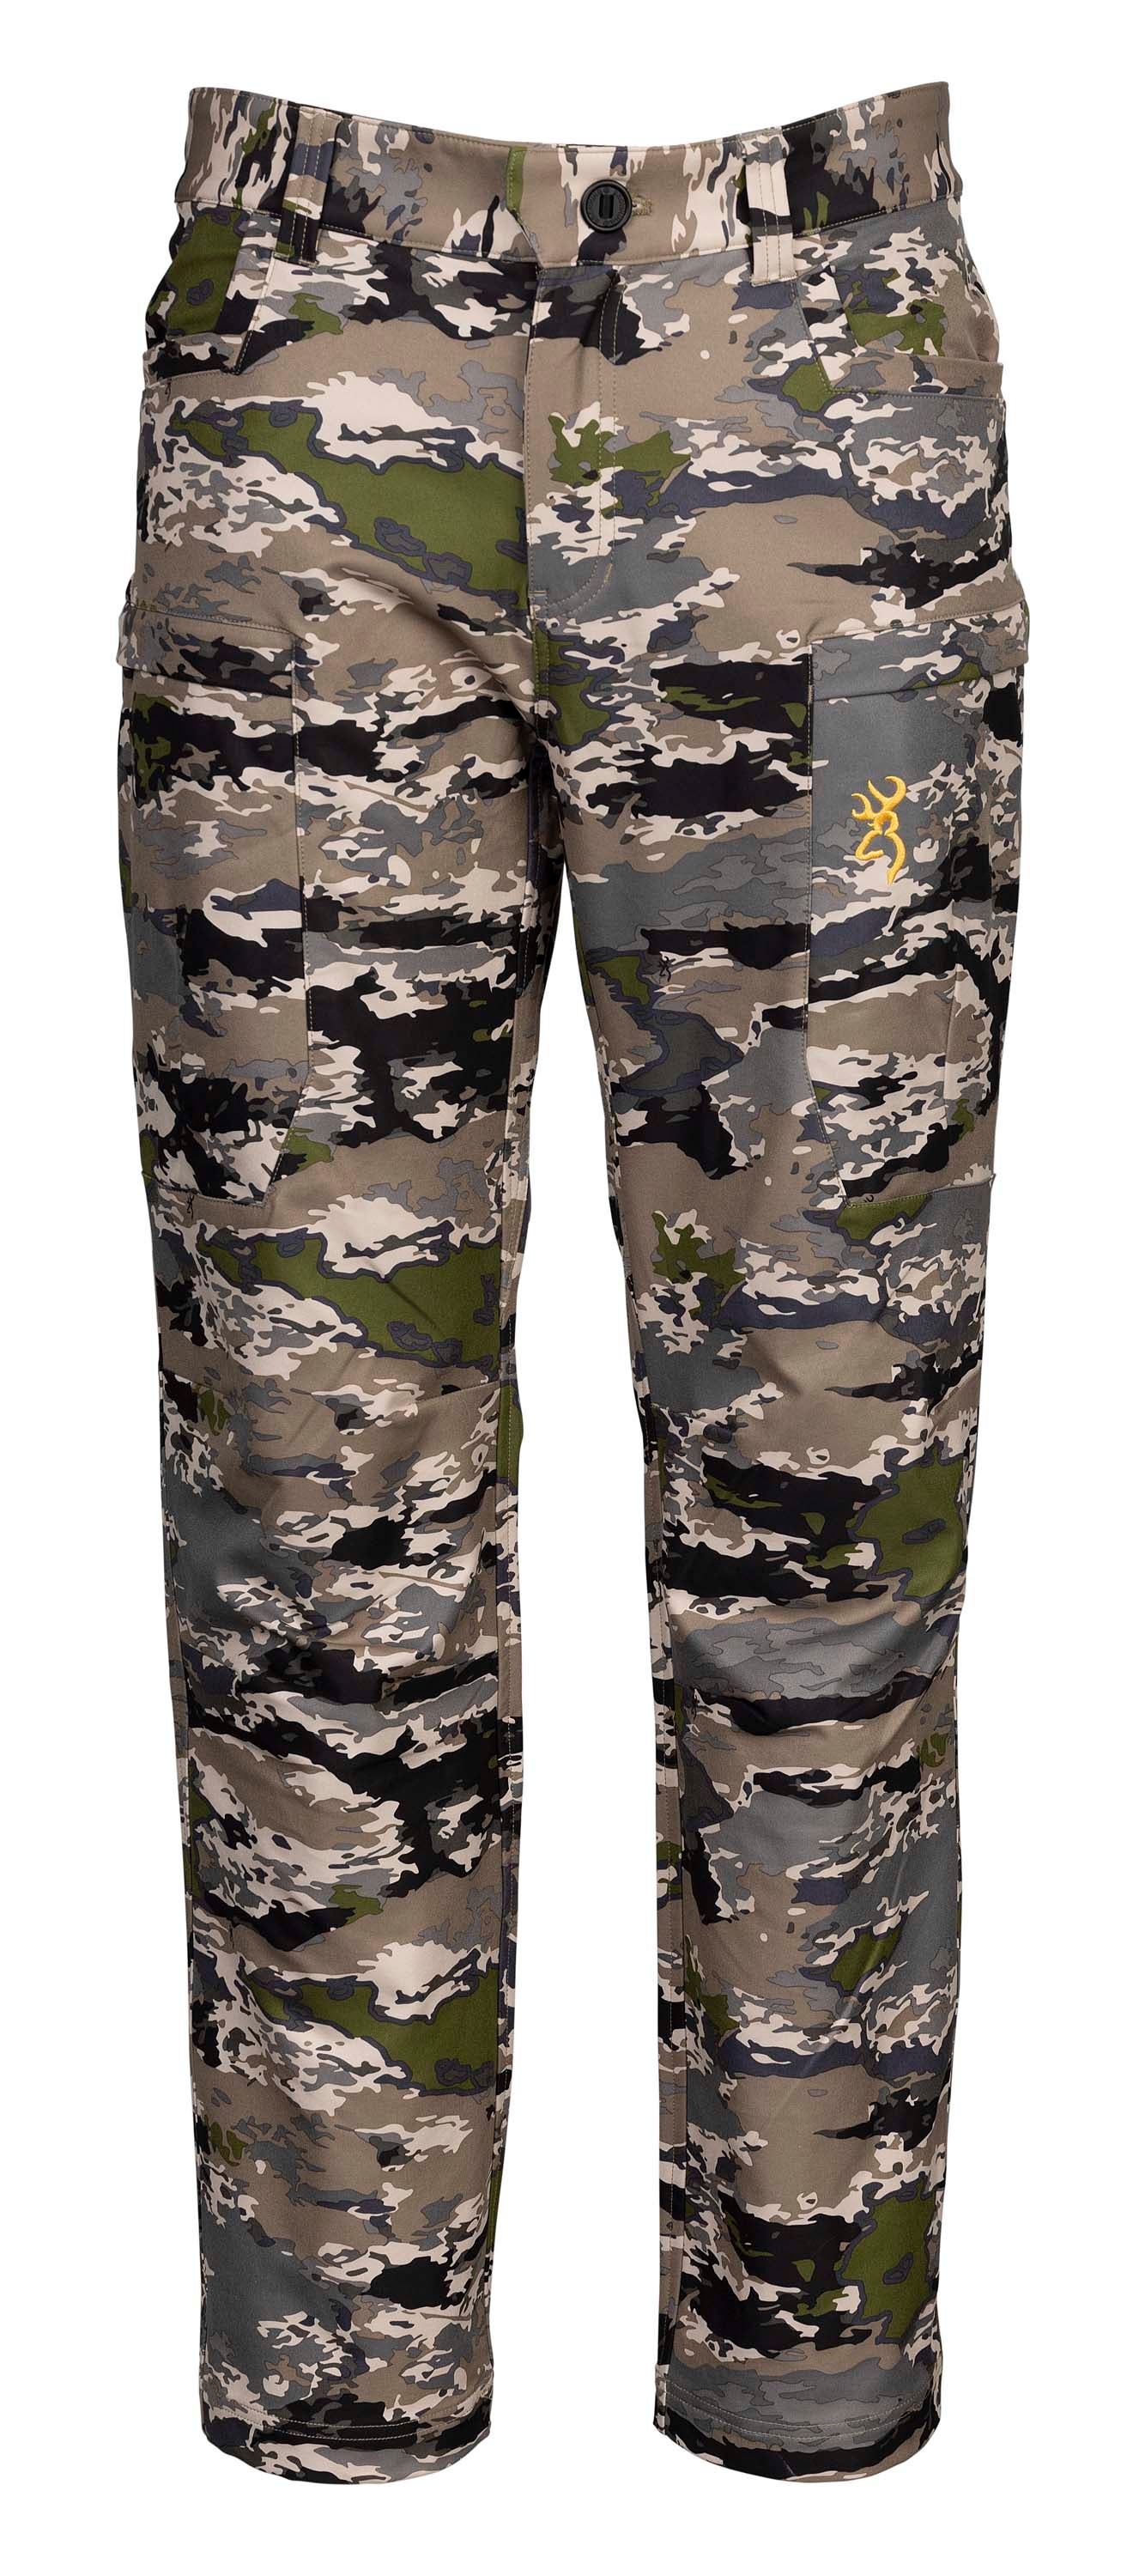 https://www.browning.com/content/dam/browning/product/clothing/2023/pavant-pro-pant/pahvant-pro-pant-ovix-30203834-1.jpg?width=835&auto=webp&quality=75